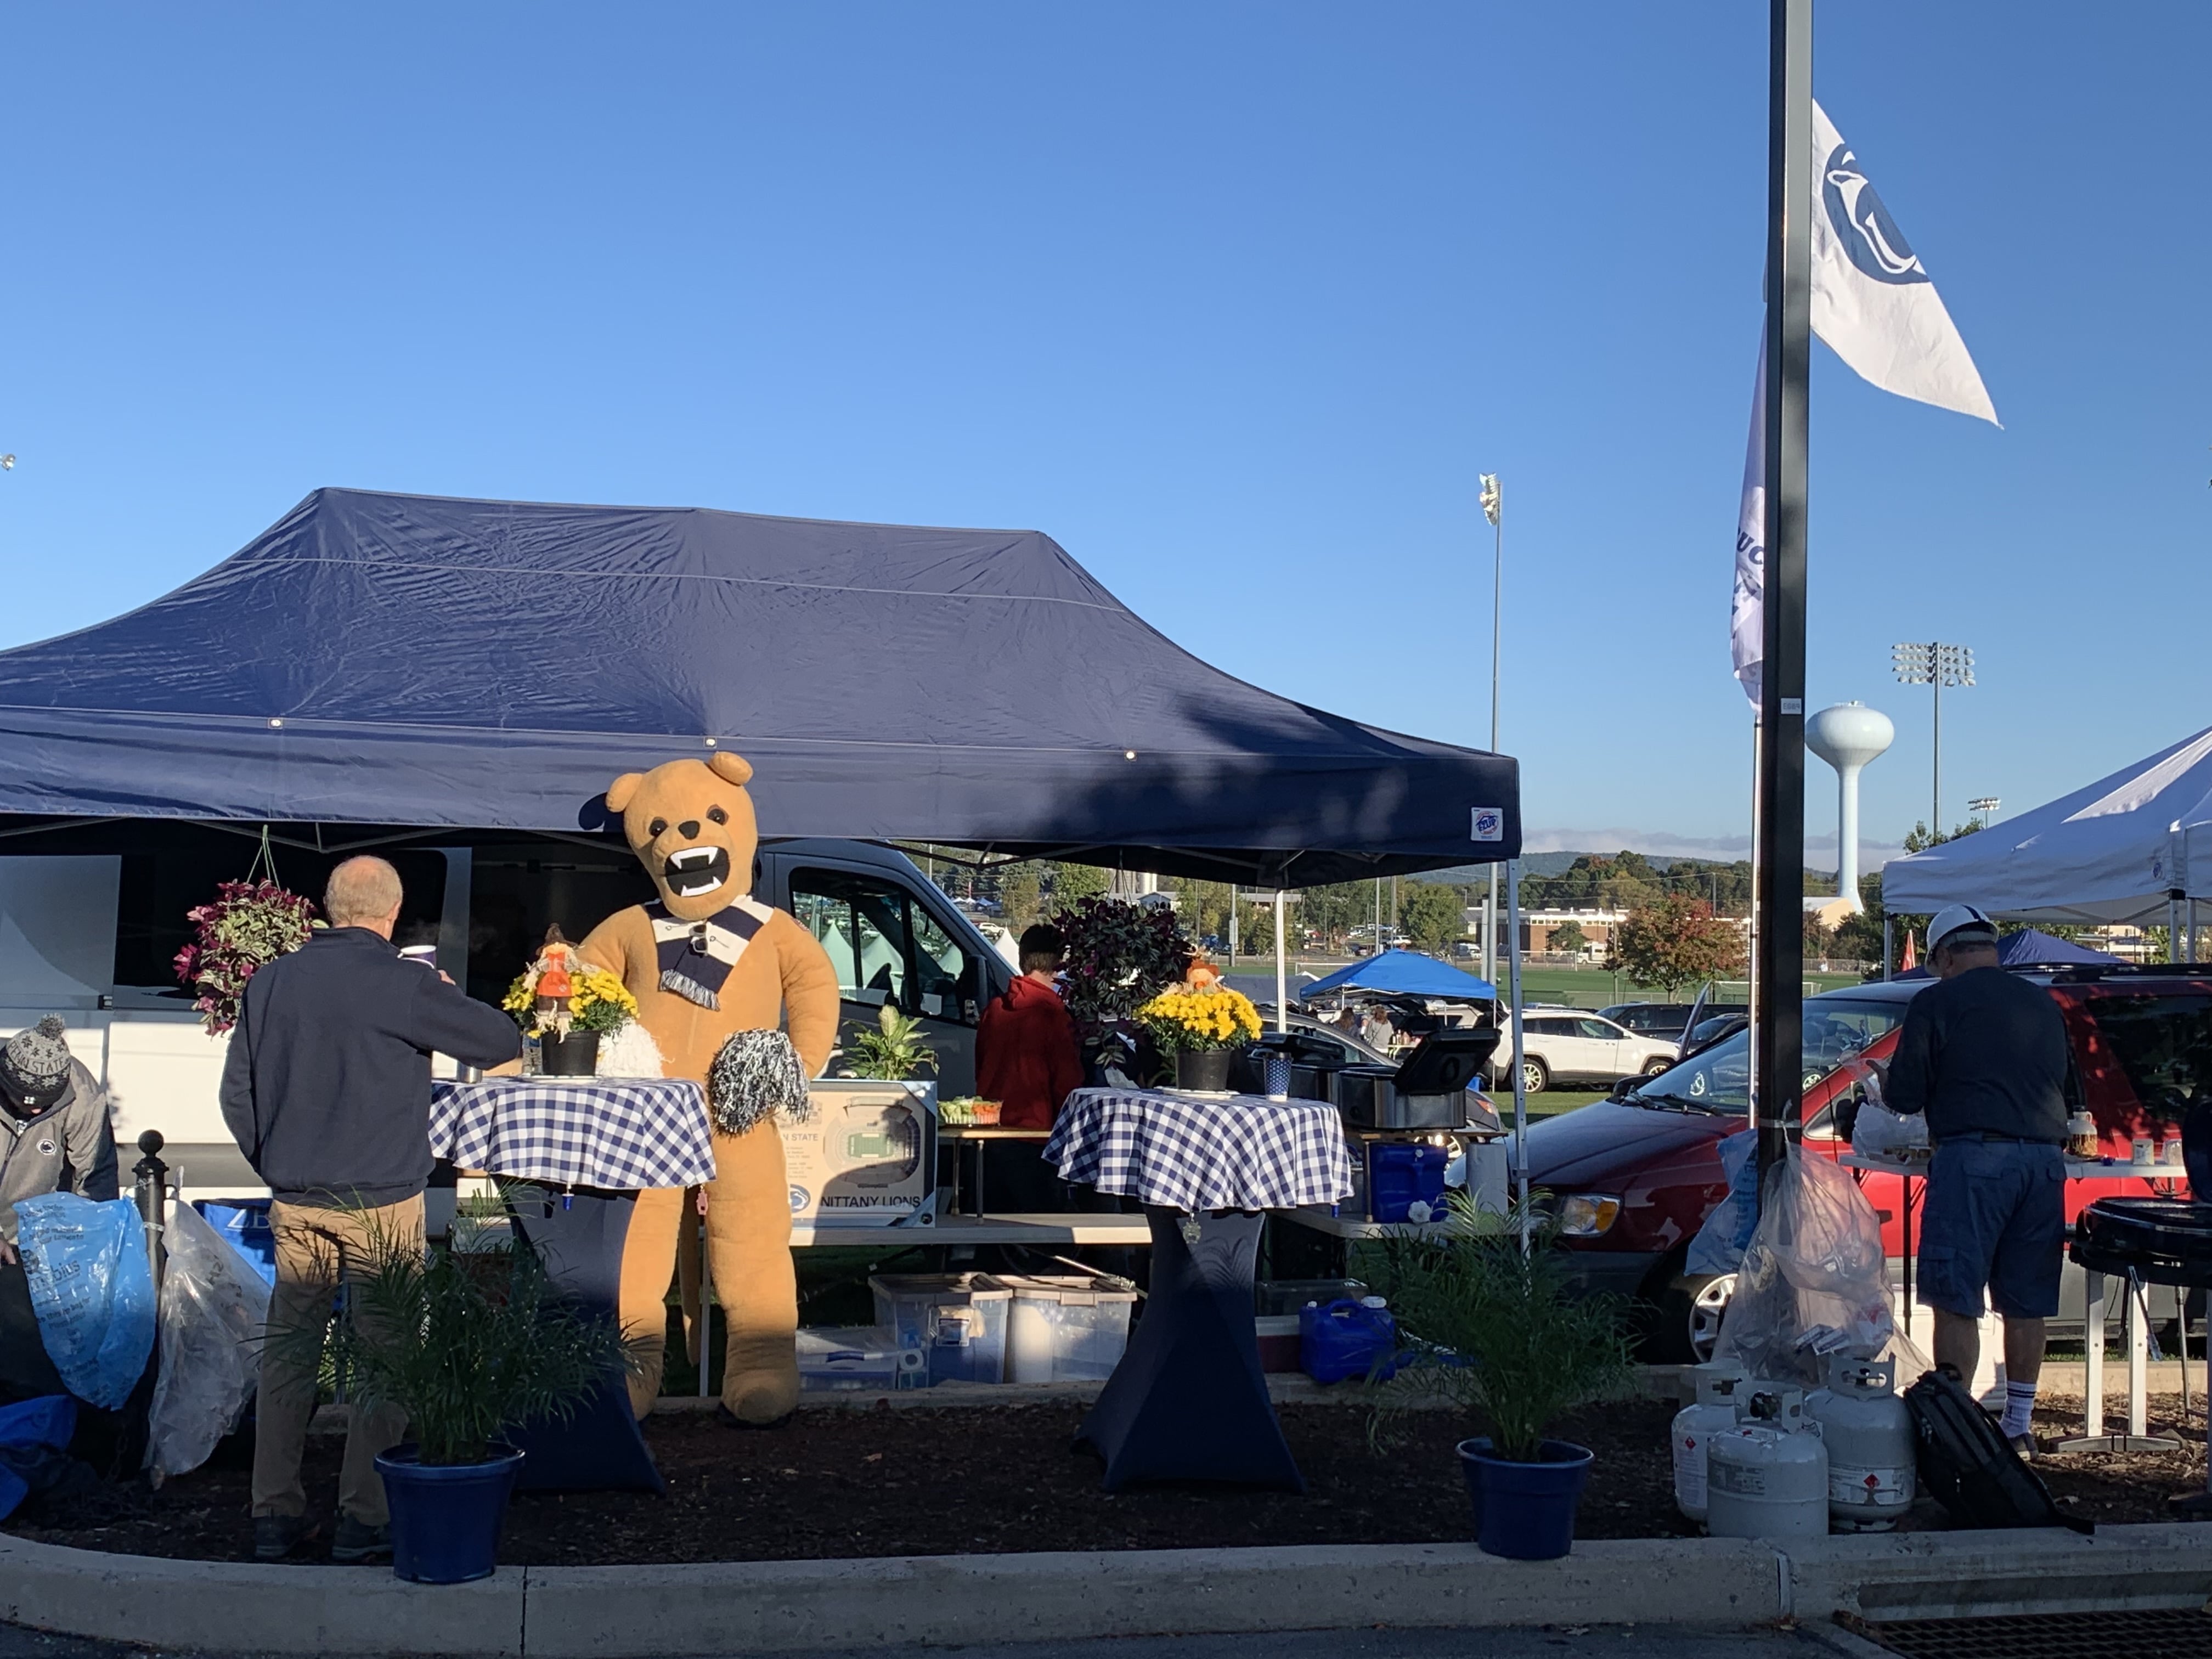 Penn State Homecoming 2019 - A trip to Penn State in State College, Pennsylvania for the 2019 Homecoming football game! | Penn State Football - State College, Pennsylvania - Beaver Stadium - Tailgating - PSU - Happy Valley